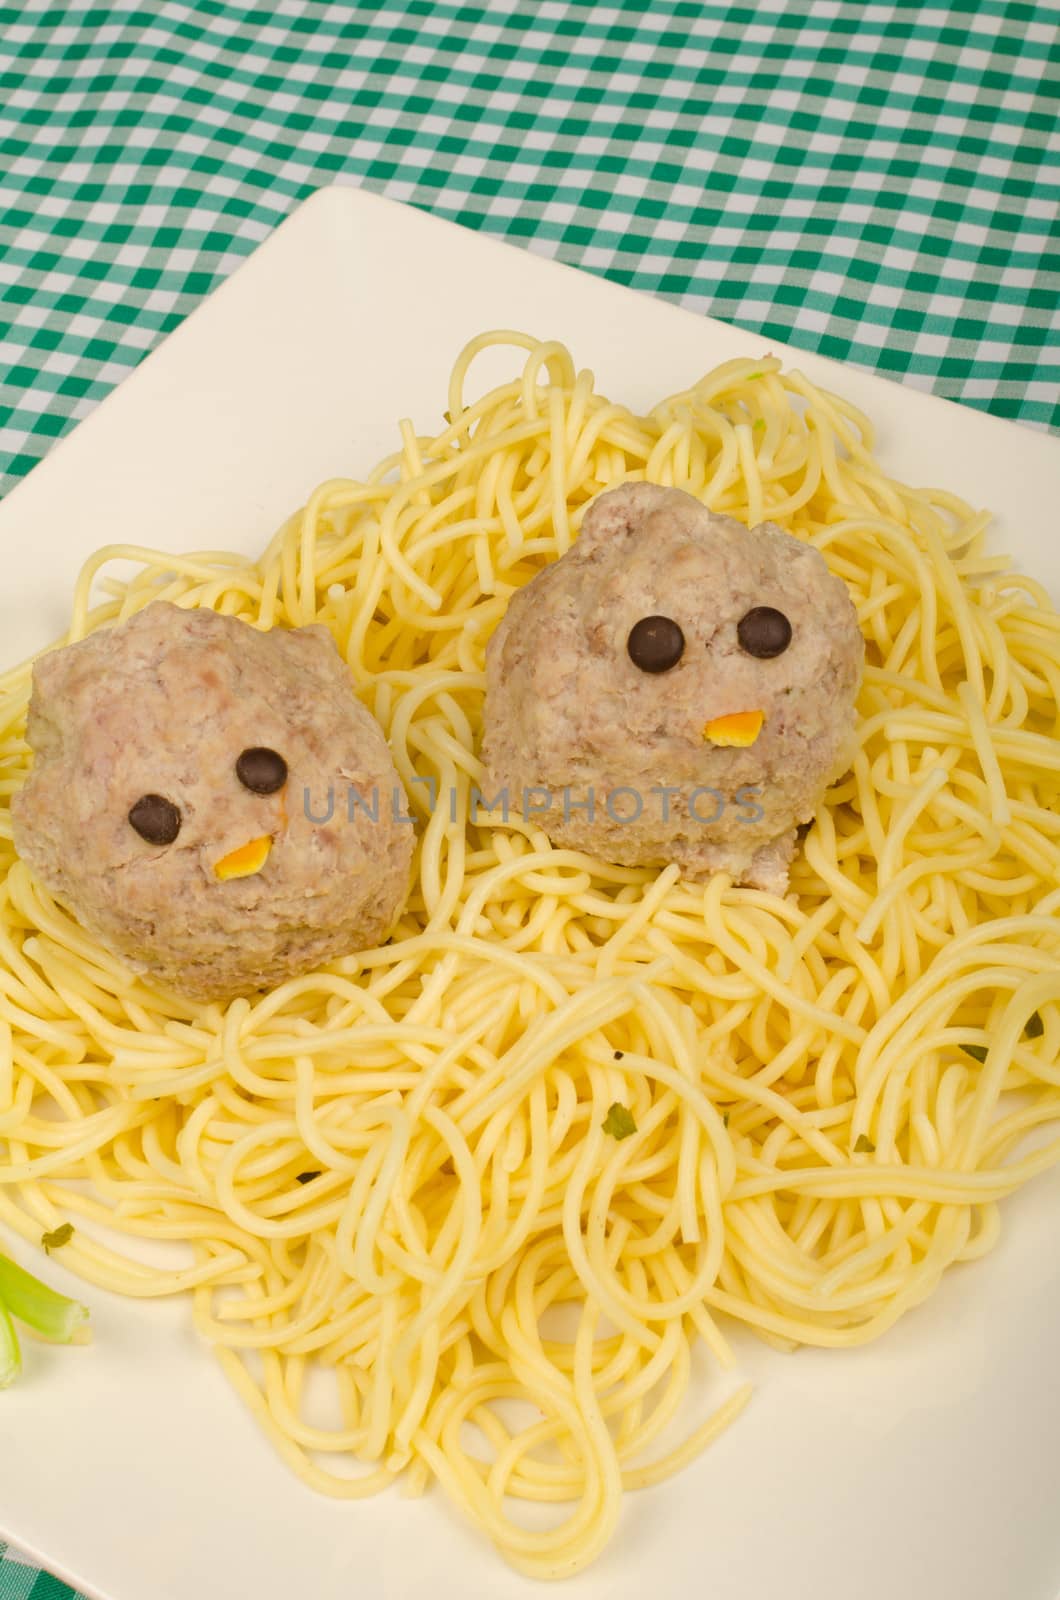 Portion of spaghetti with a funny decoration for kids